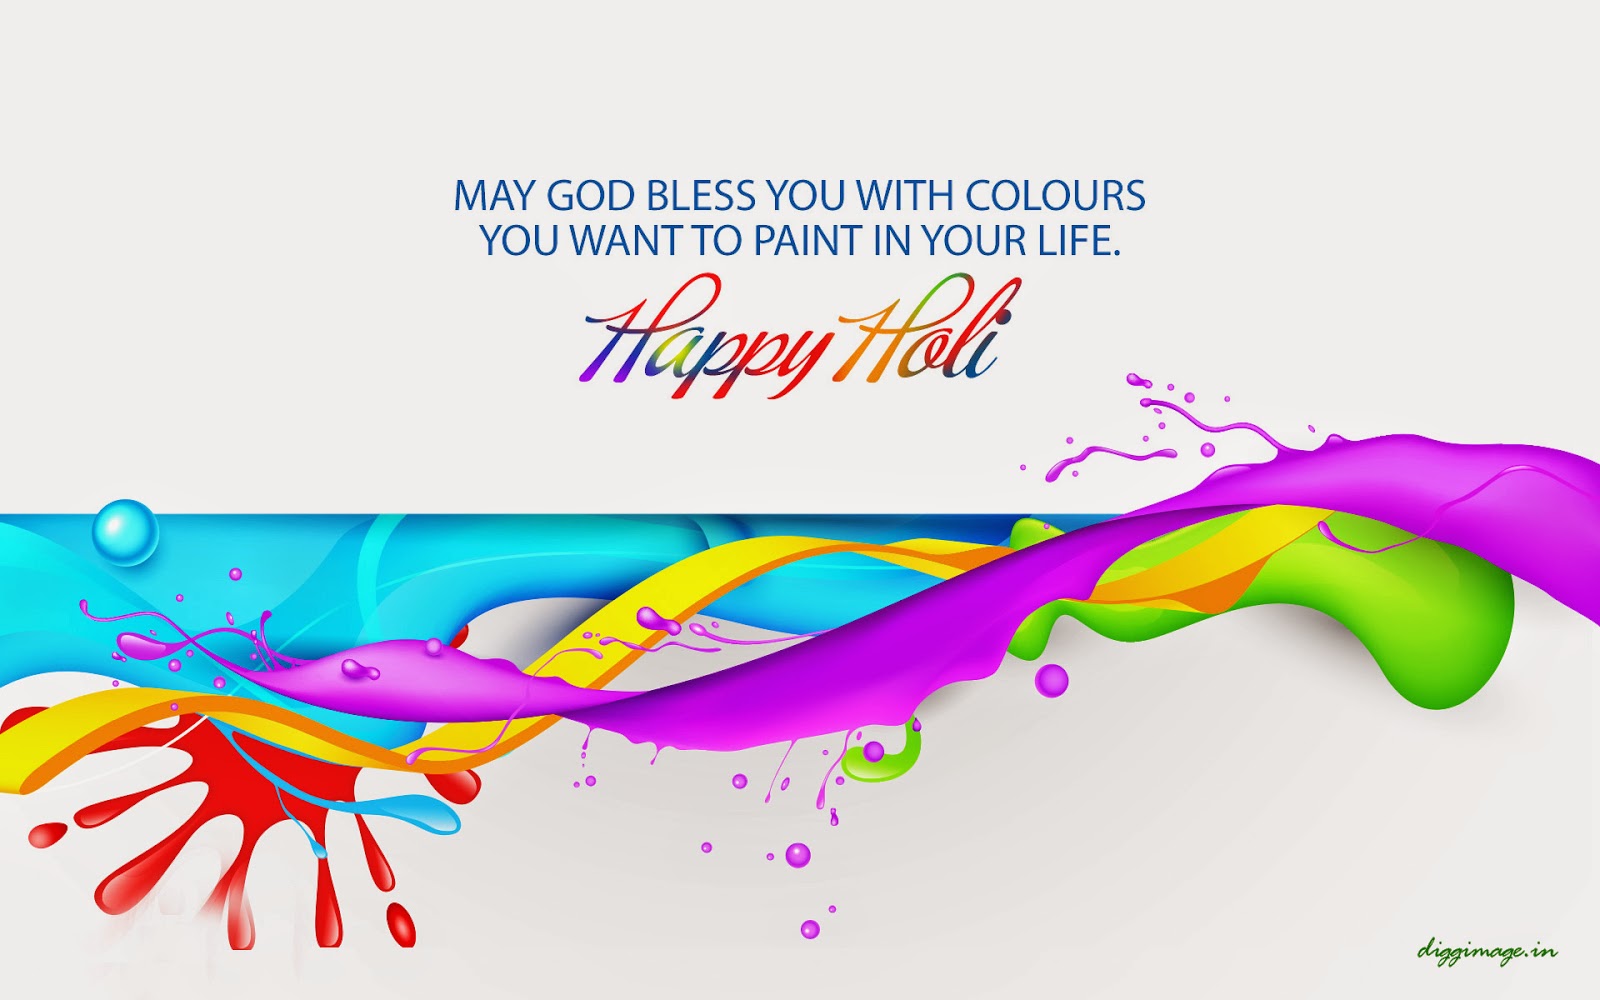 appy Holi 2015, Holi Wishes, Happy Holi Messages, Holi Quotes, Holi greetings Cards, Images, Holi Songs, Holi HD Wallpapers, Pictures,